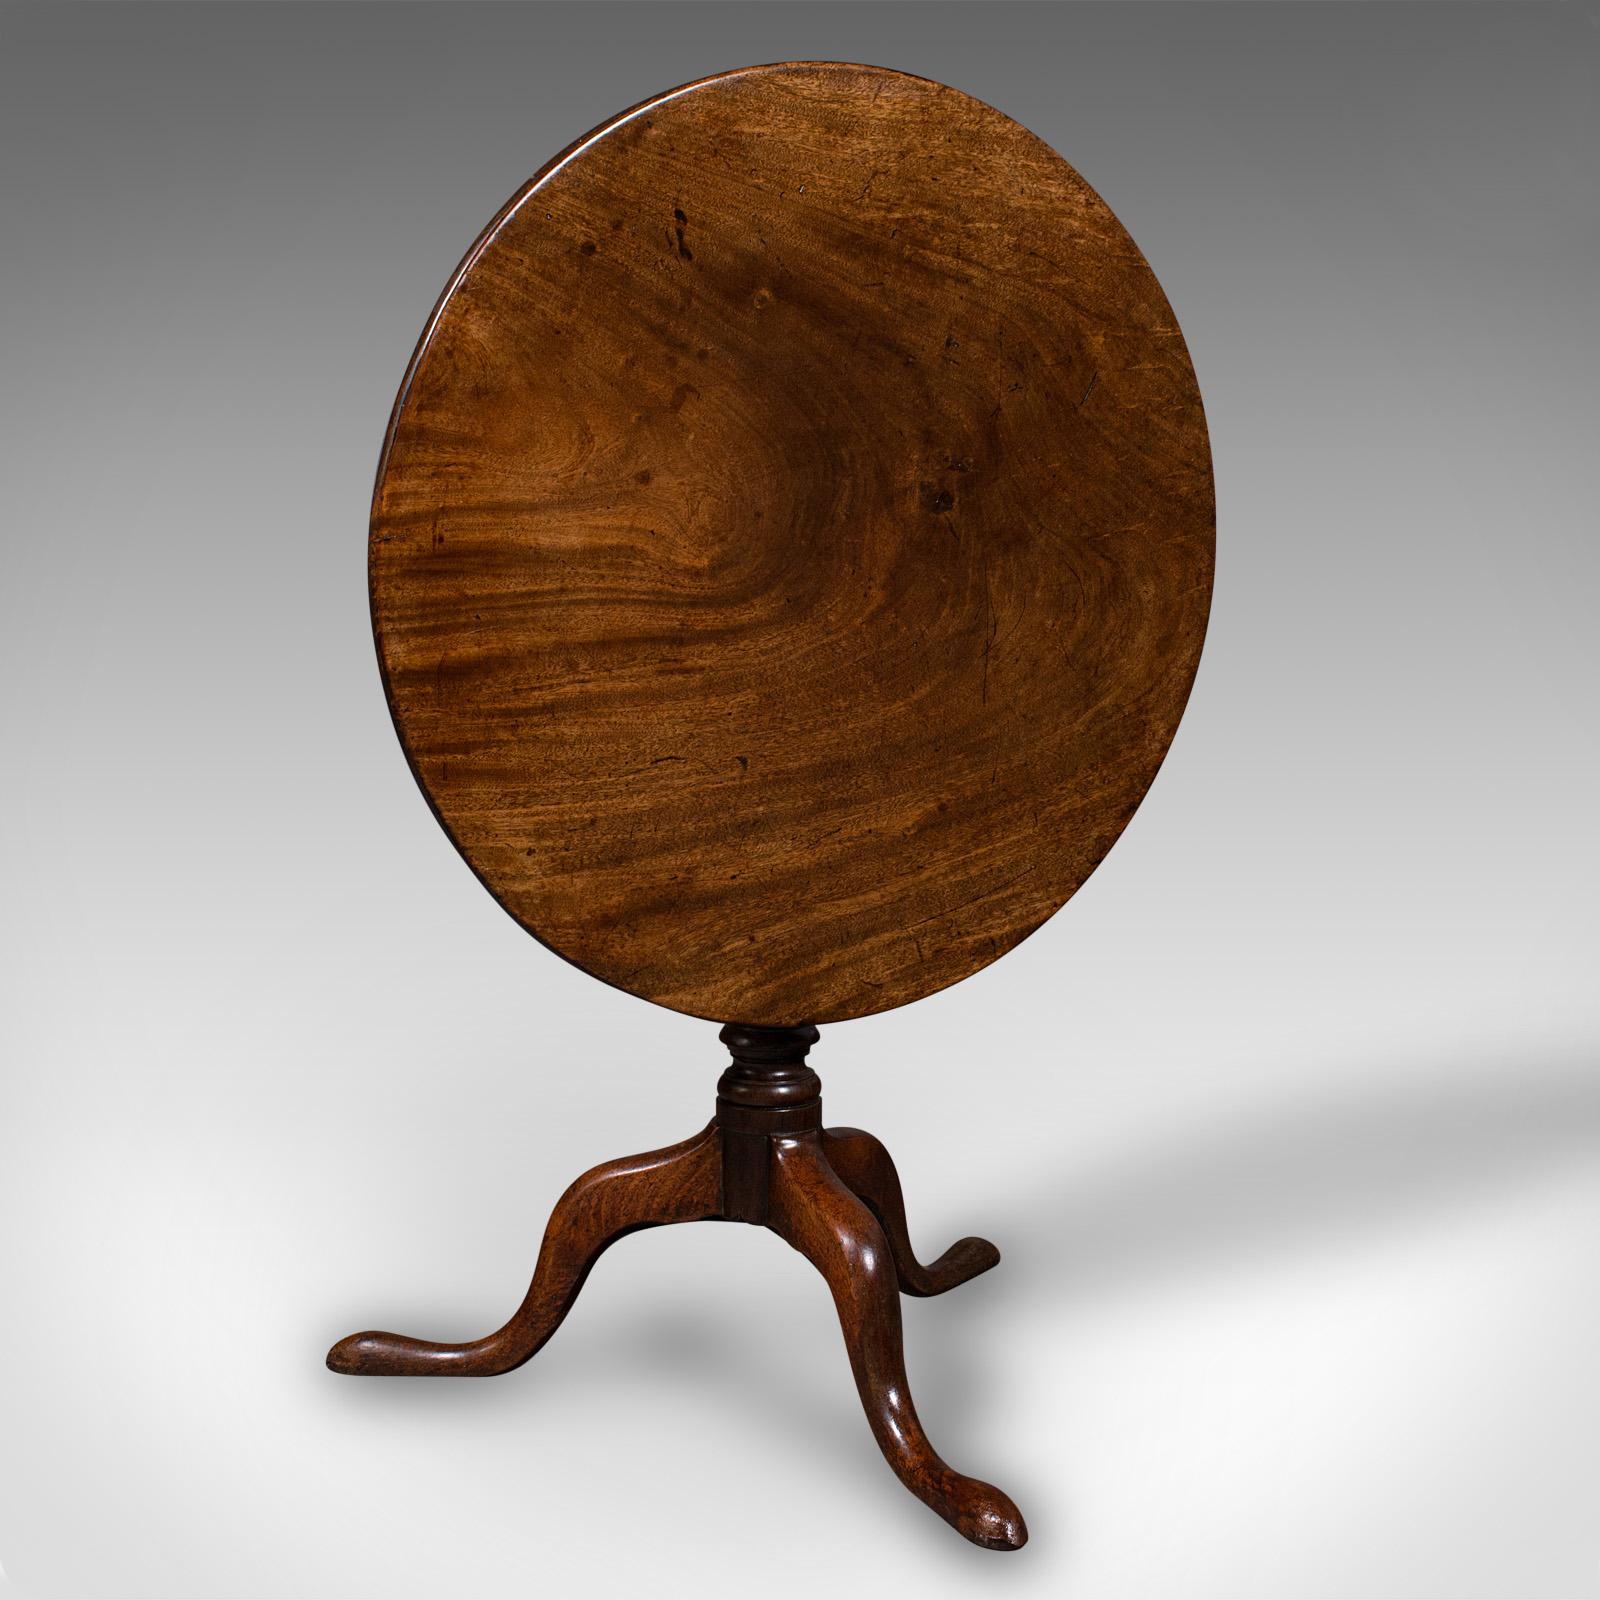 This is an antique occasional table. An English, mahogany tilt-top table with birdcage mount, dating to the Georgian period, circa 1800.

Presents beautifully with a versatile, fully articulated top
Displays a desirable aged patina and in good